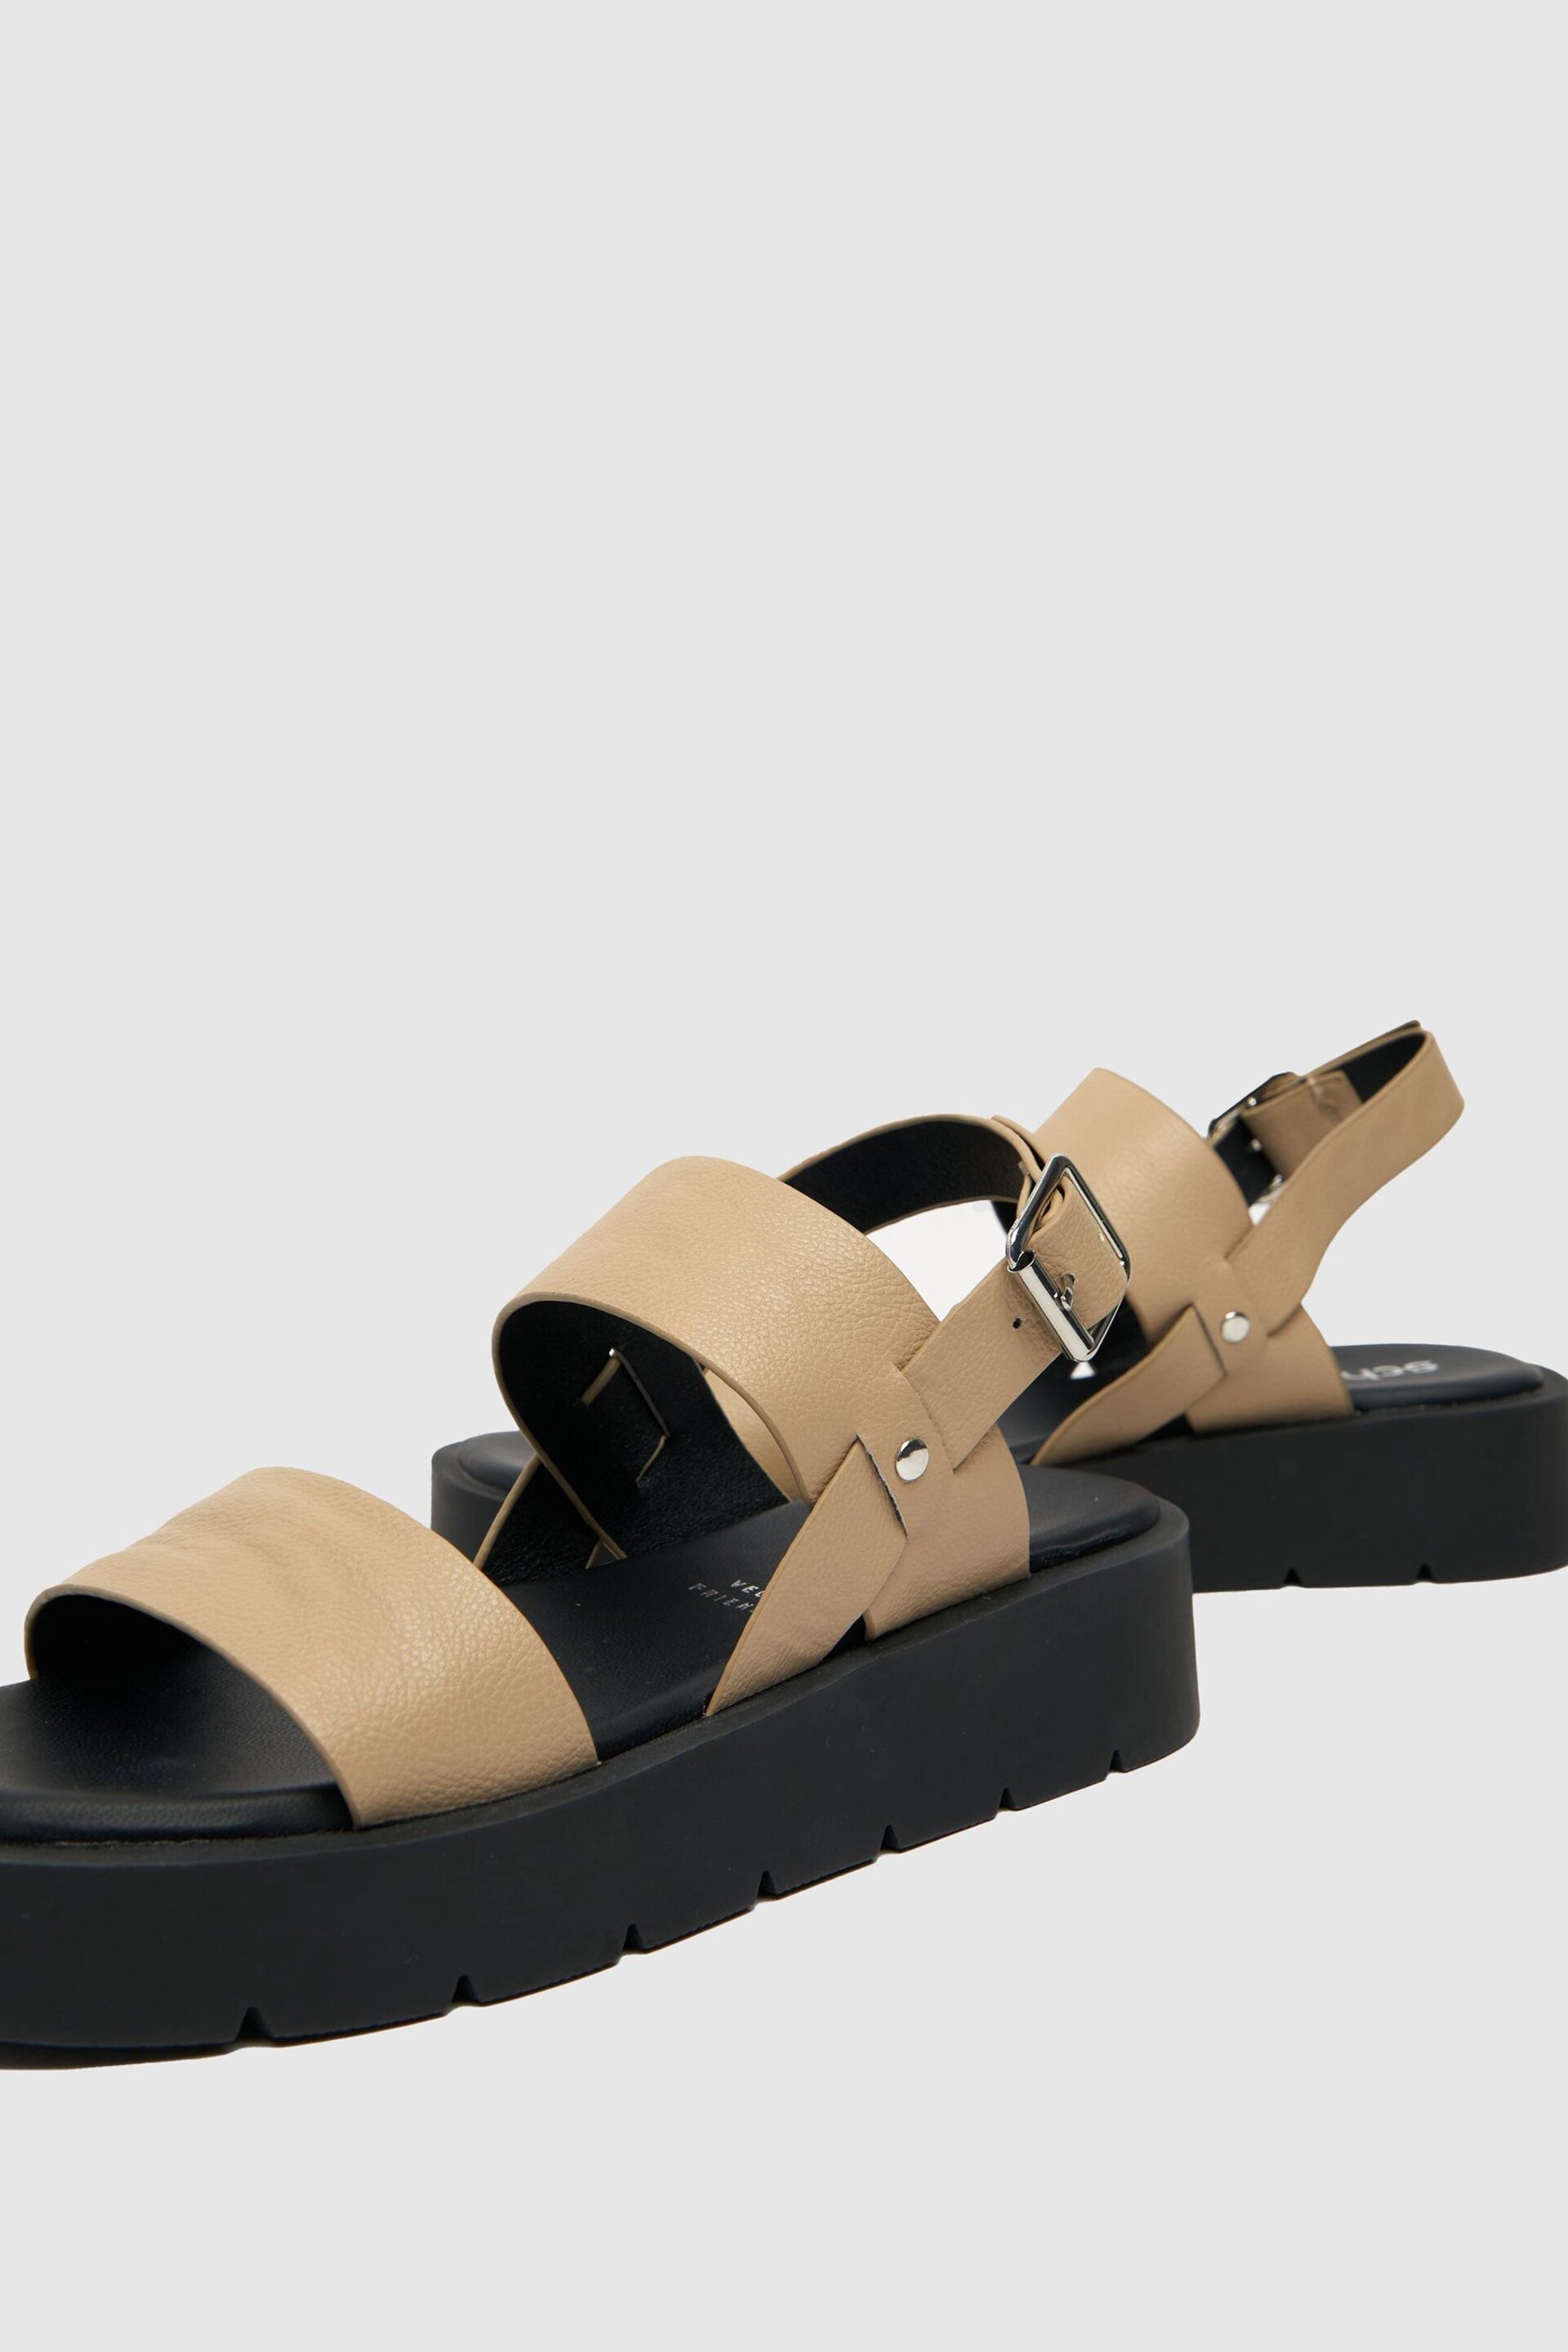 Schuh Tayla Chunky Sandals - Image 4 of 4